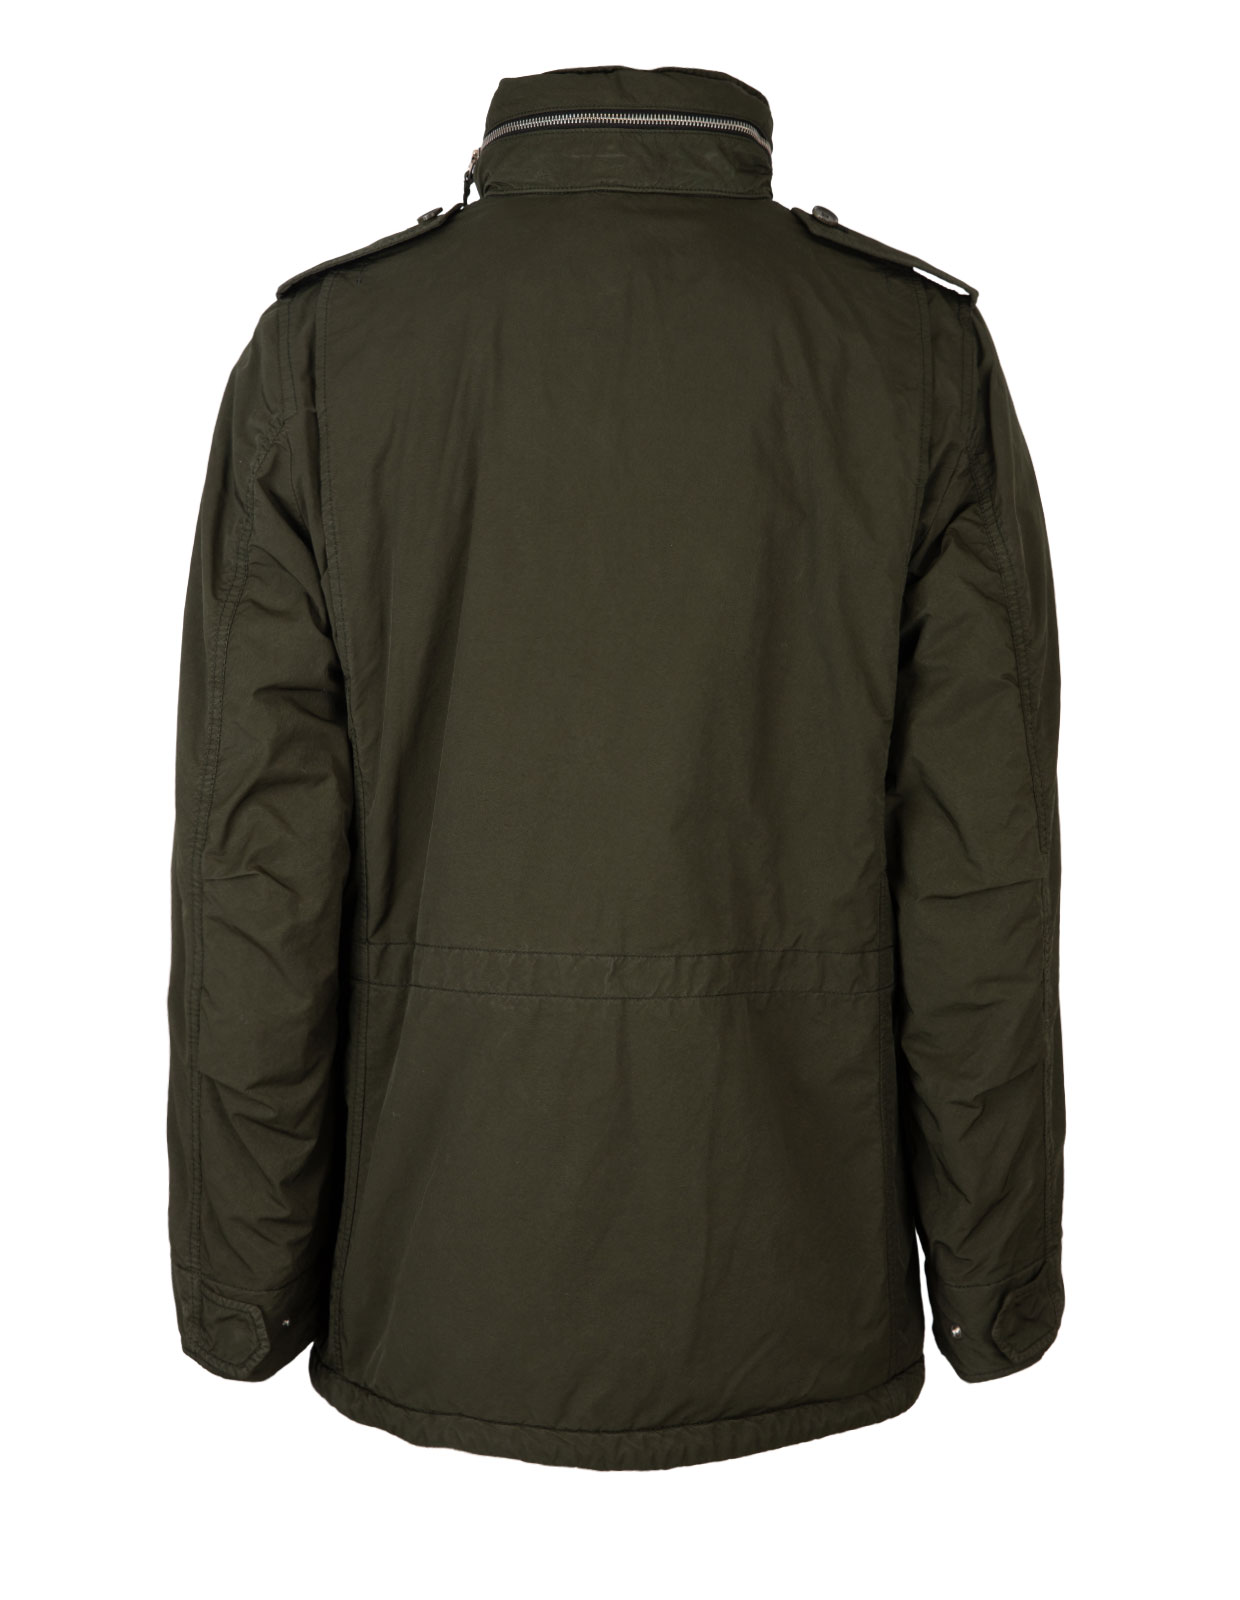 M65 New Camp Jacket Military